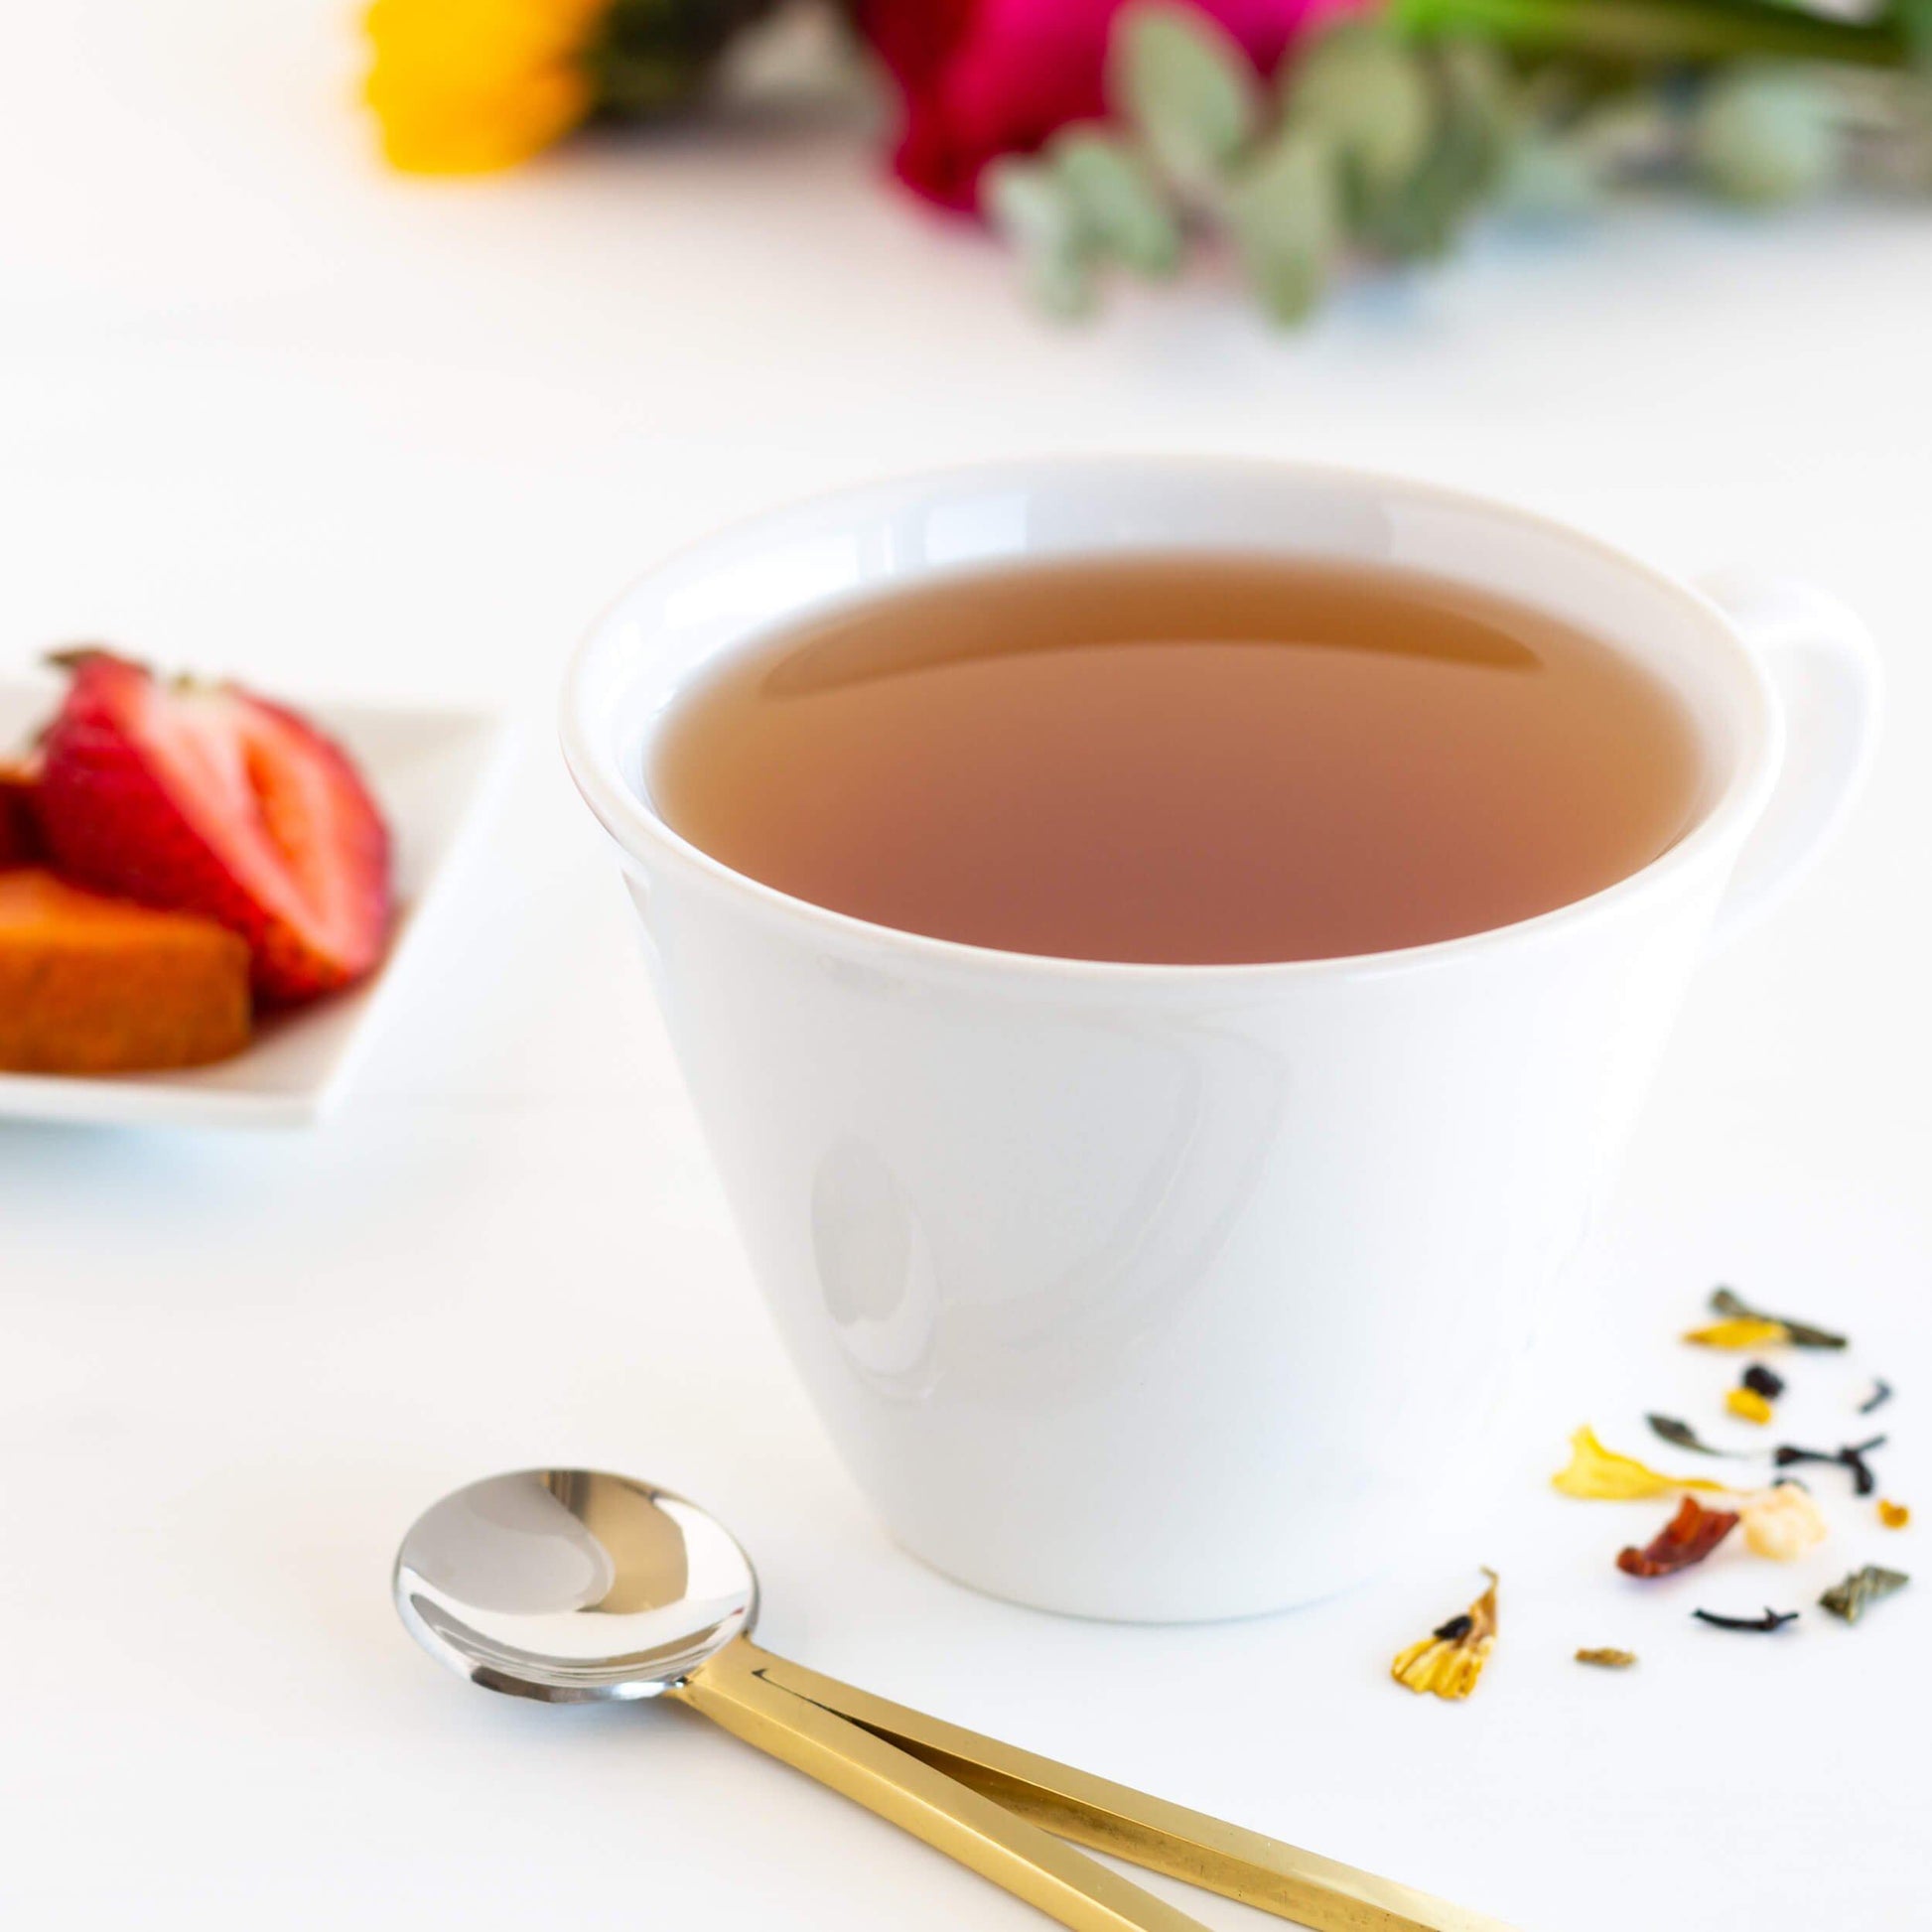 Summer Romance Black & Green Tea shown as brewed tea in a small white cup with strawberries and flowers in the background, and a brass handled spoon in the foreground